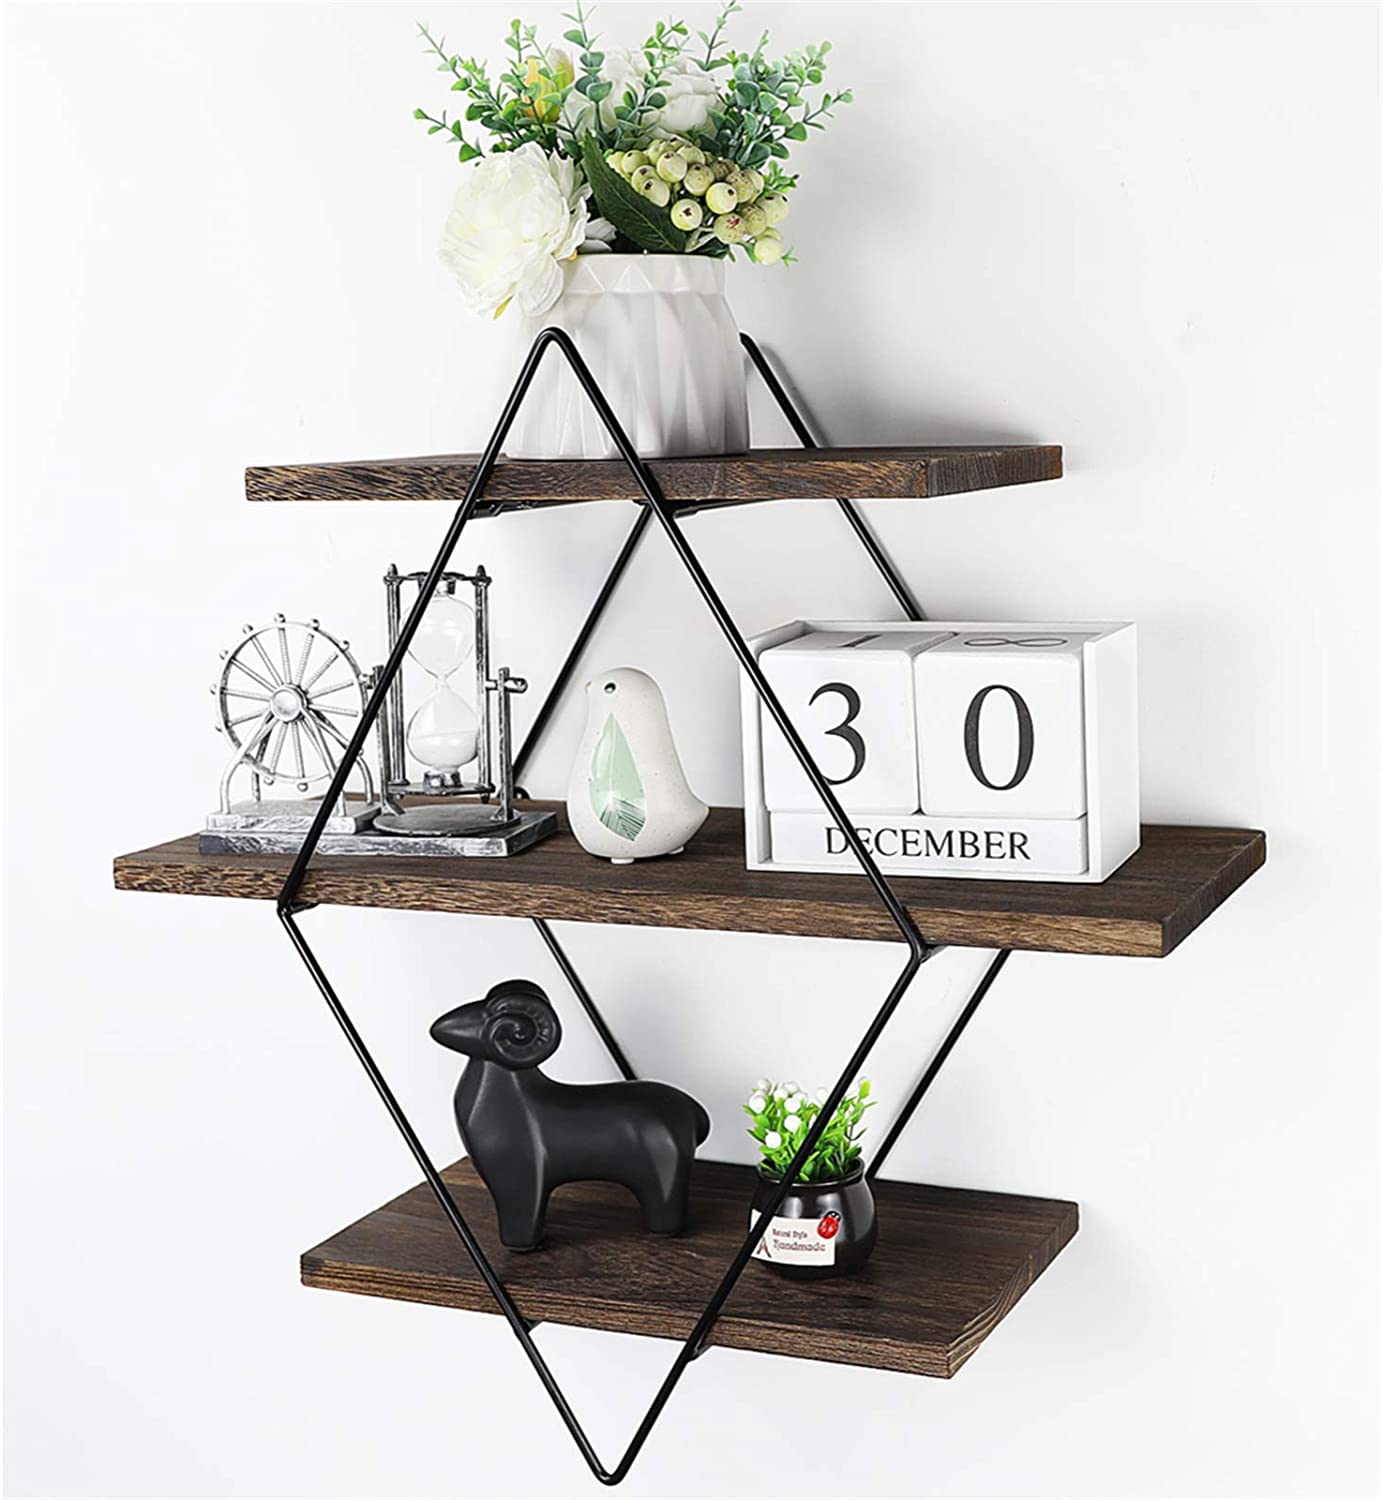 Wholesale high quality  geometric metal and wooden wall-mounted shelf shelves Featured Image